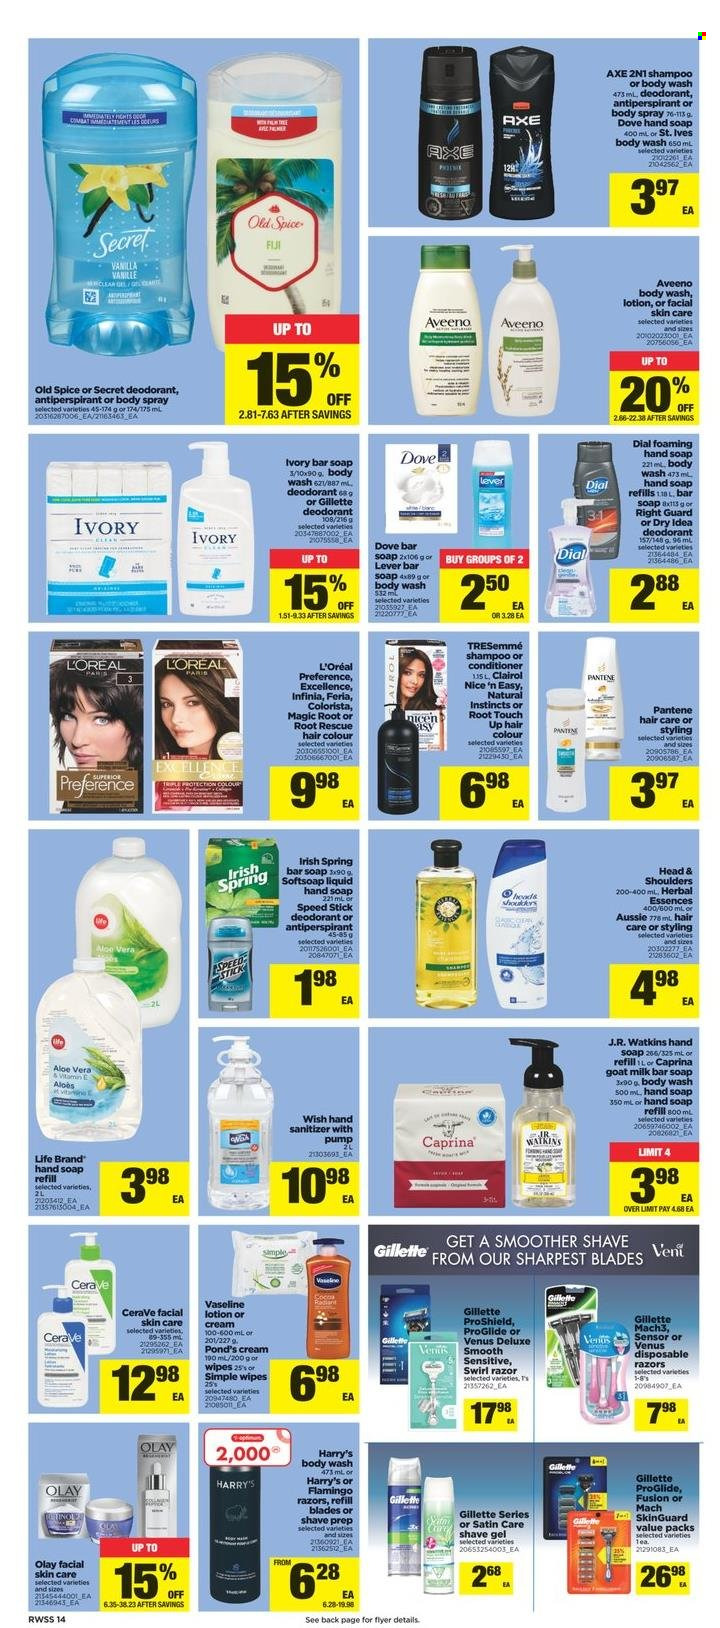 thumbnail - Real Canadian Superstore Flyer - October 22, 2021 - October 28, 2021 - Sales products - goat milk, spice, tea, wipes, Aveeno, body wash, Softsoap, hand soap, Vaseline, soap bar, POND'S, Dial, soap, CeraVe, L’Oréal, Olay, Aussie, Clairol, conditioner, TRESemmé, hair color, body lotion, body spray, anti-perspirant, Speed Stick, razor, shave gel, Venus, disposable razor, hand sanitizer, Dove, Gillette, shampoo, Head & Shoulders, Pantene, Old Spice, deodorant. Page 14.